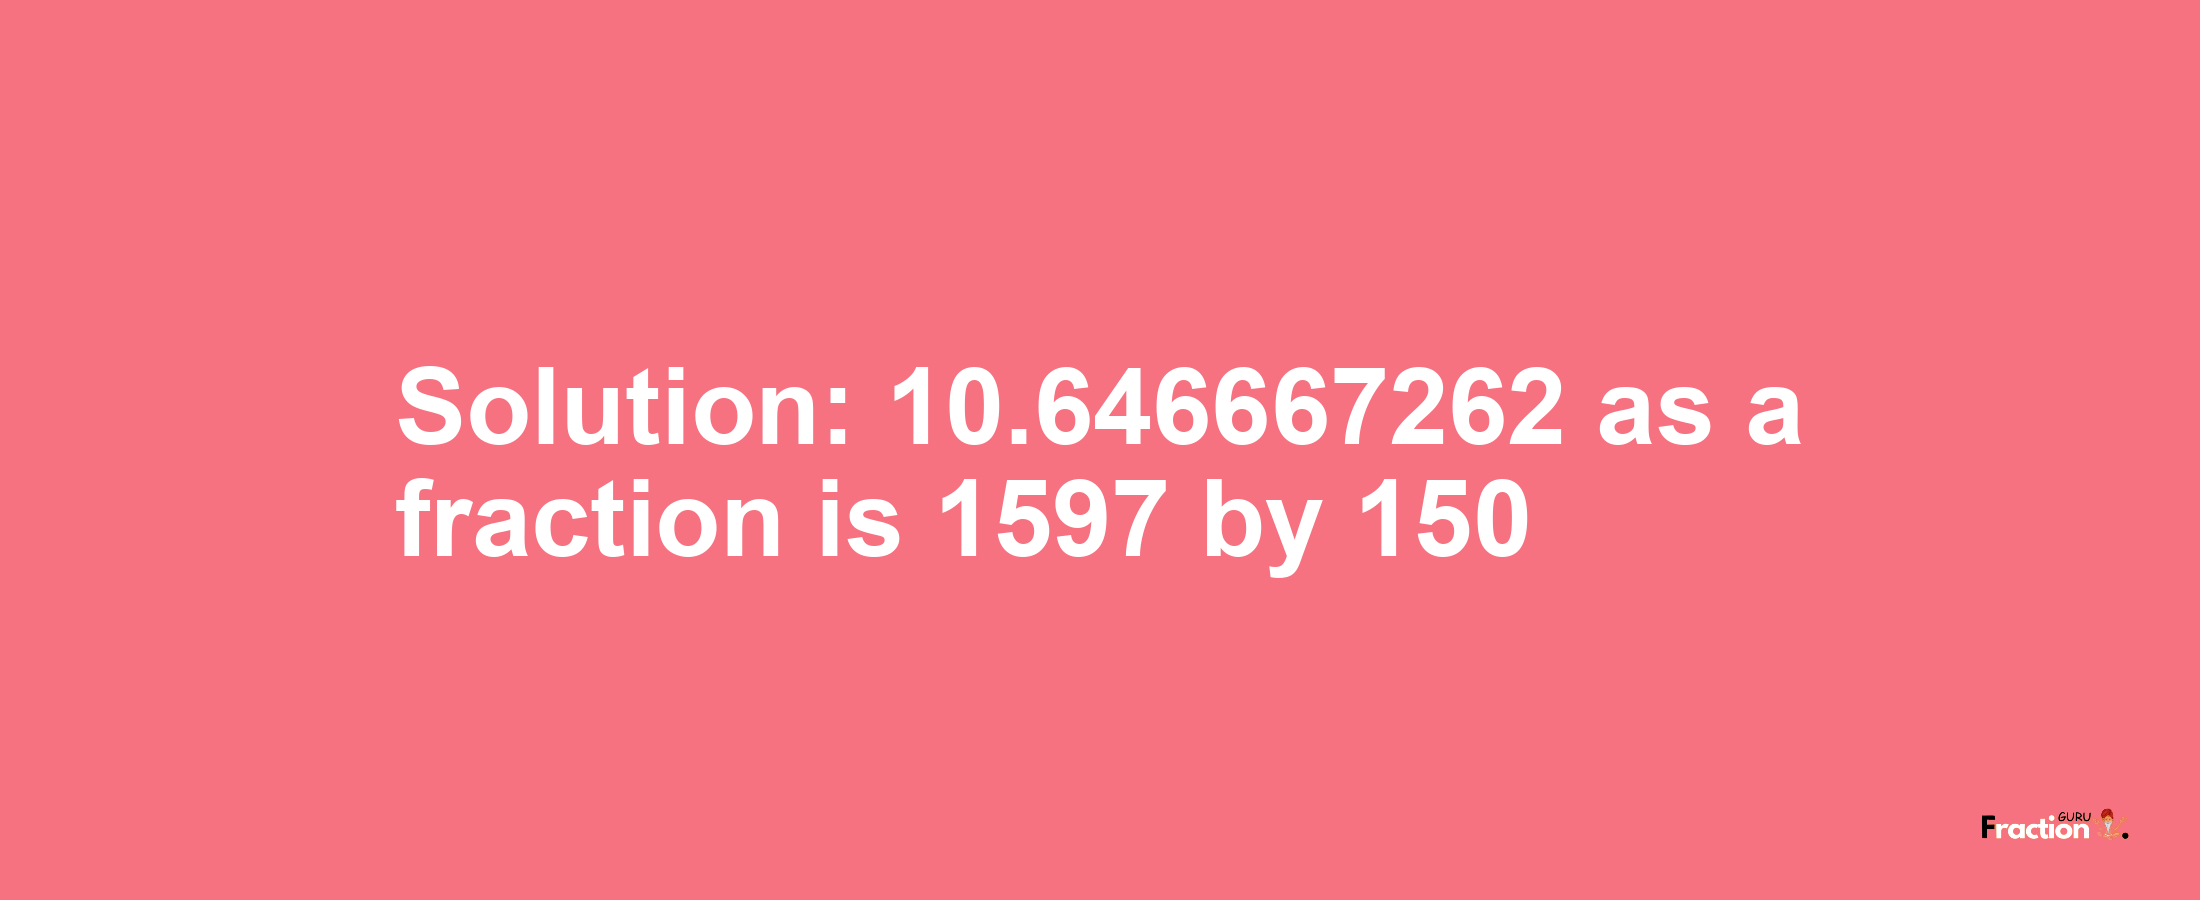 Solution:10.646667262 as a fraction is 1597/150